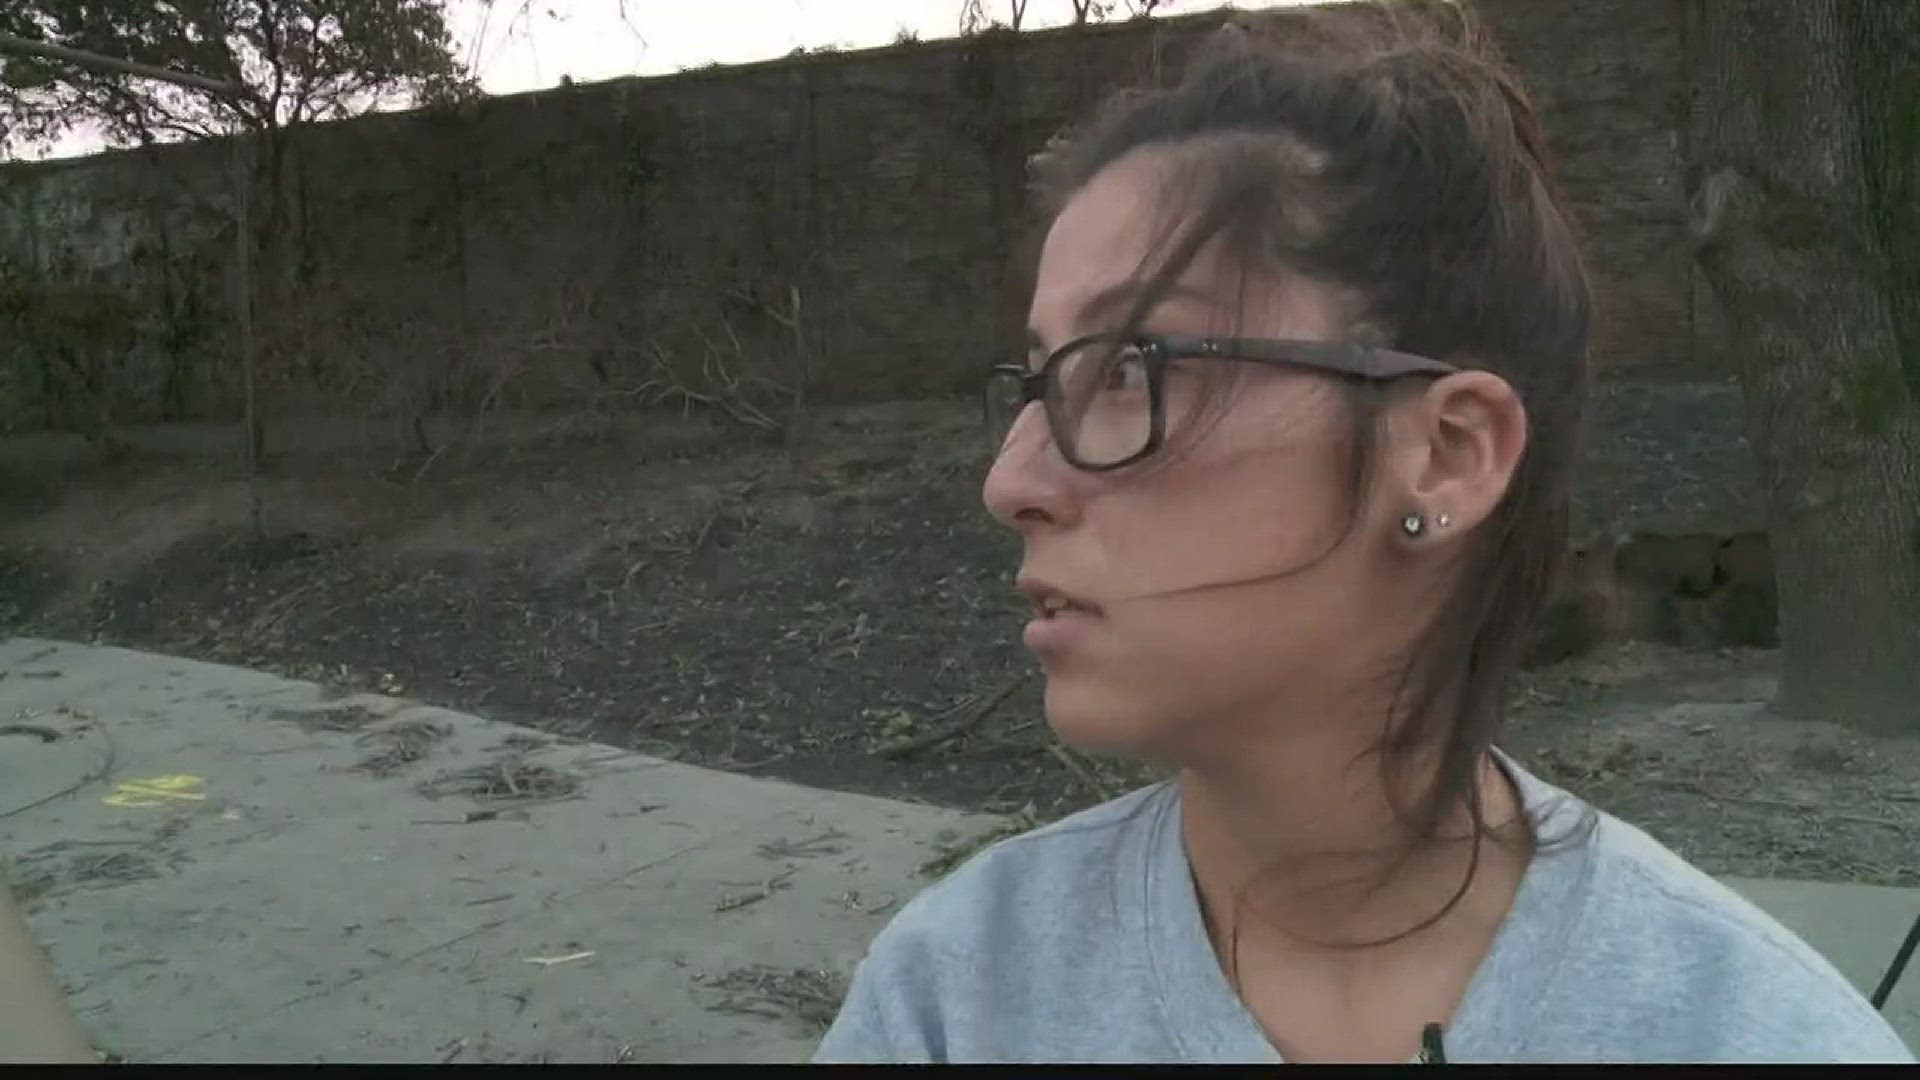 A Rohnert Park woman, after witnessing the wildfire fire danger close to home, has decided to help efforts even though she still has a bullet lodged in her back from the Las Vegas mass shooting.